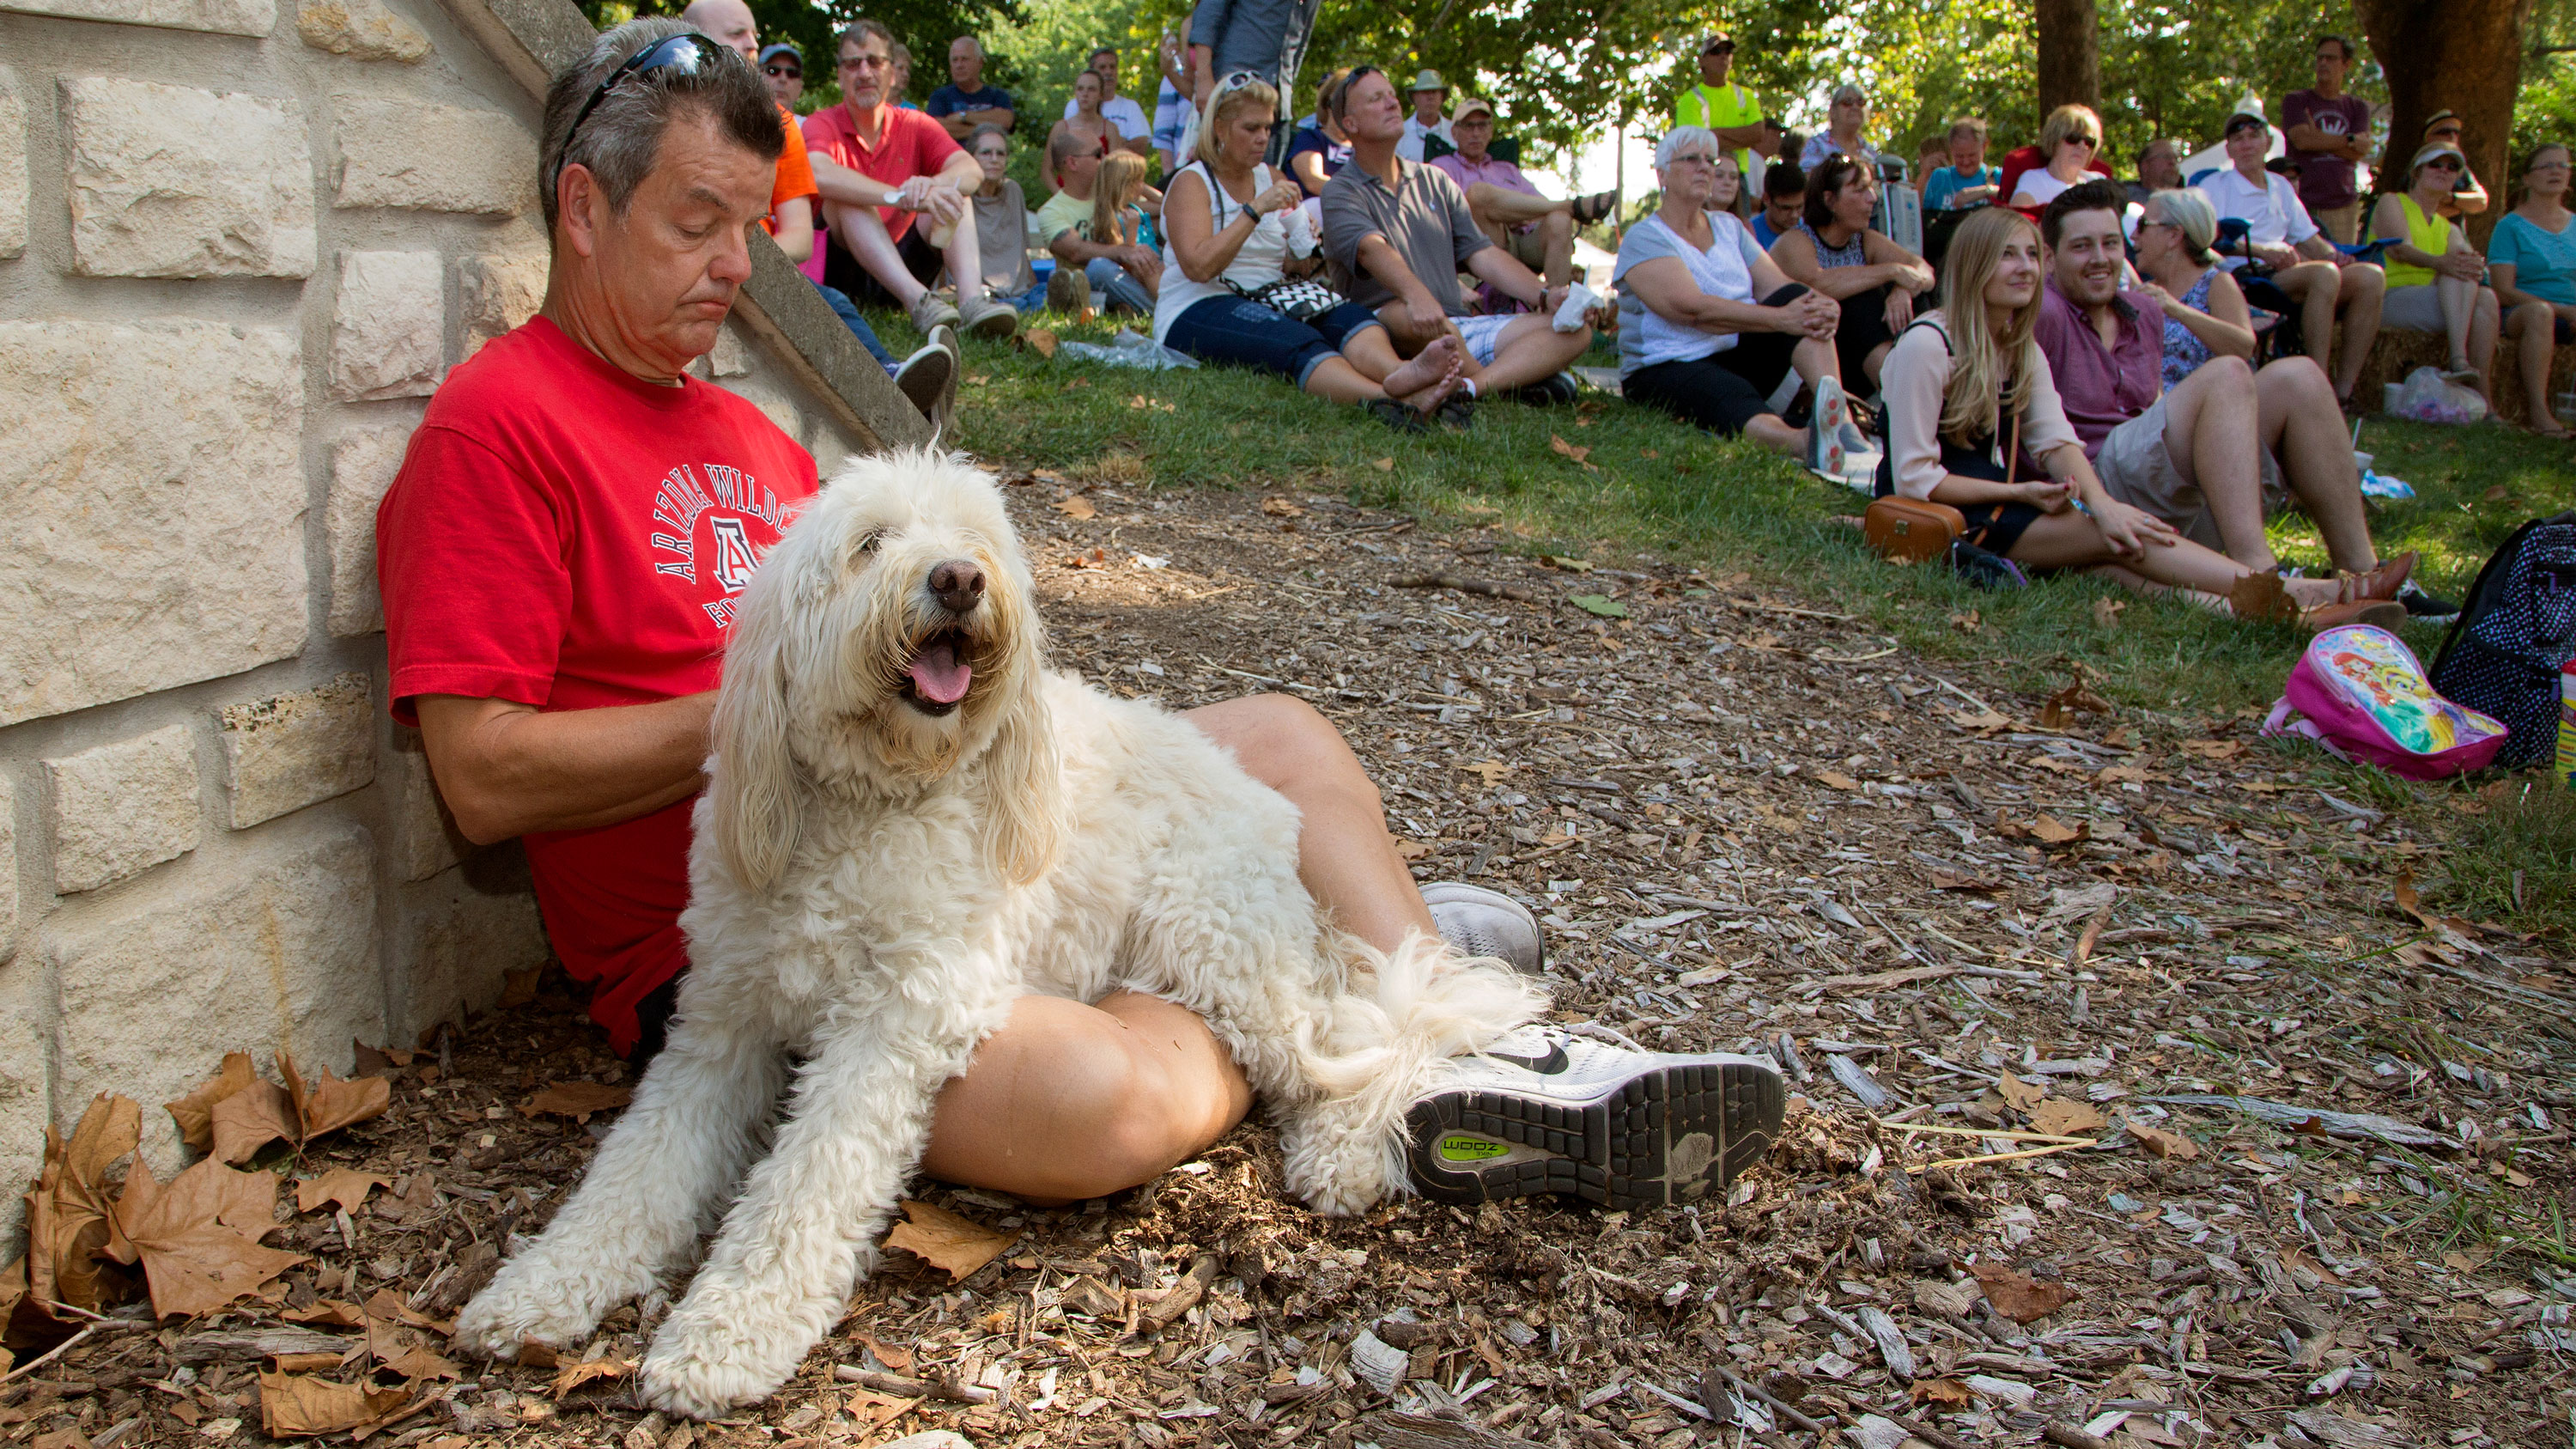 Large off-white fluffy smiling dog sits on man's lap at park while crowd watches performance in the background